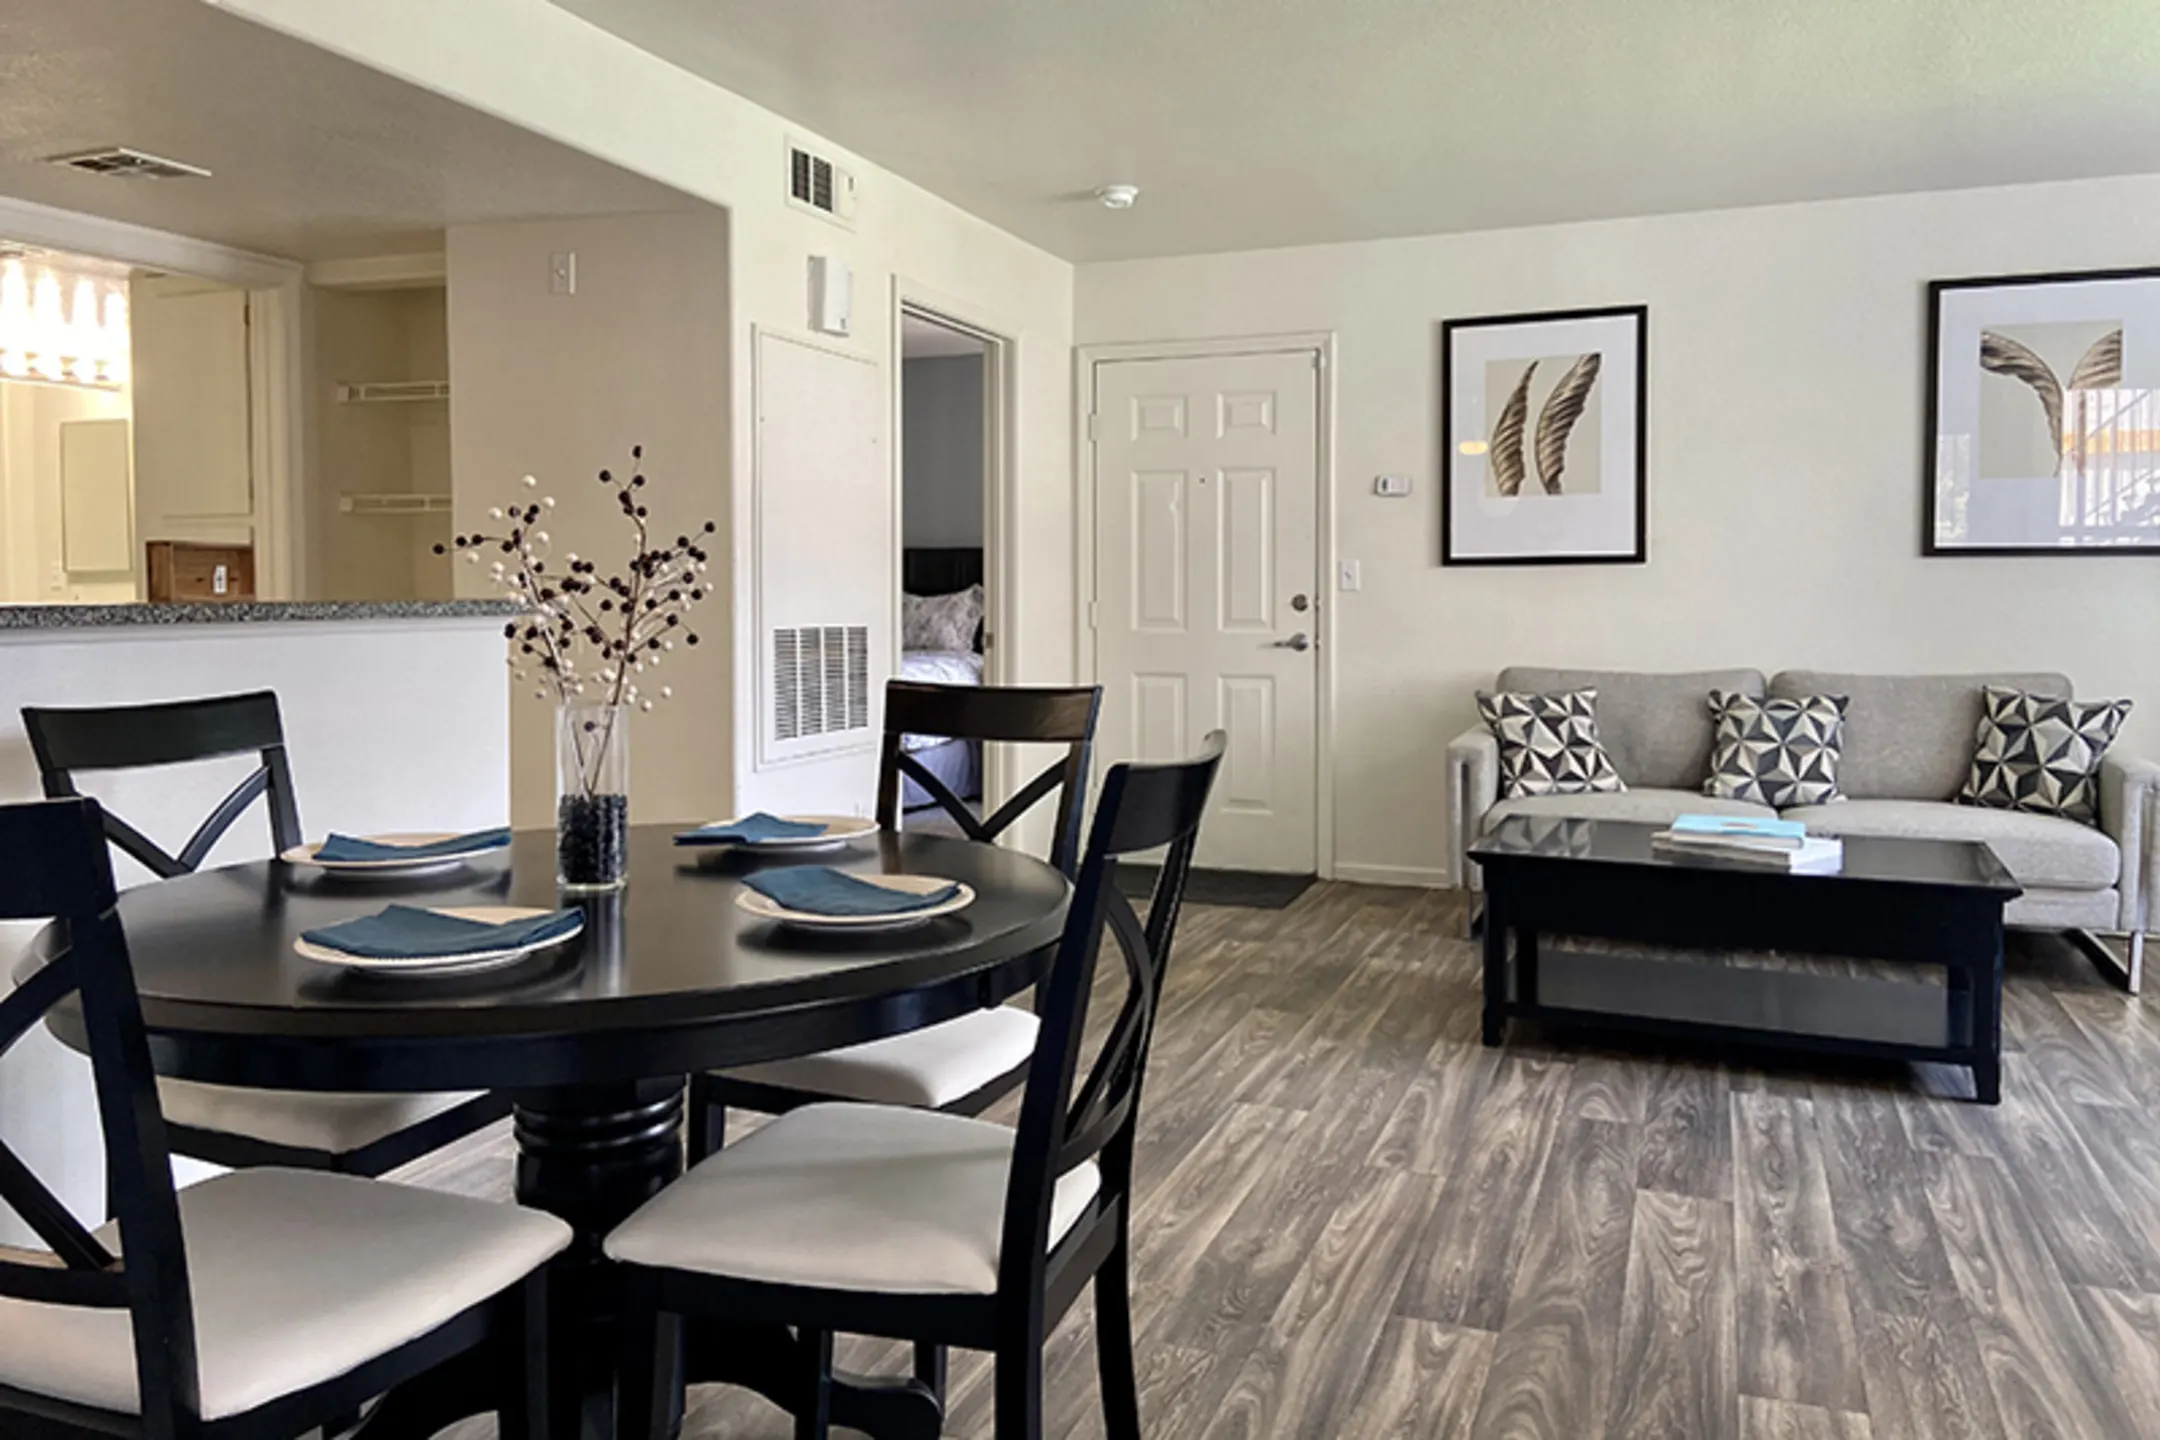 Dining Room - 20 Fifty One Apartments - Las Vegas, NV